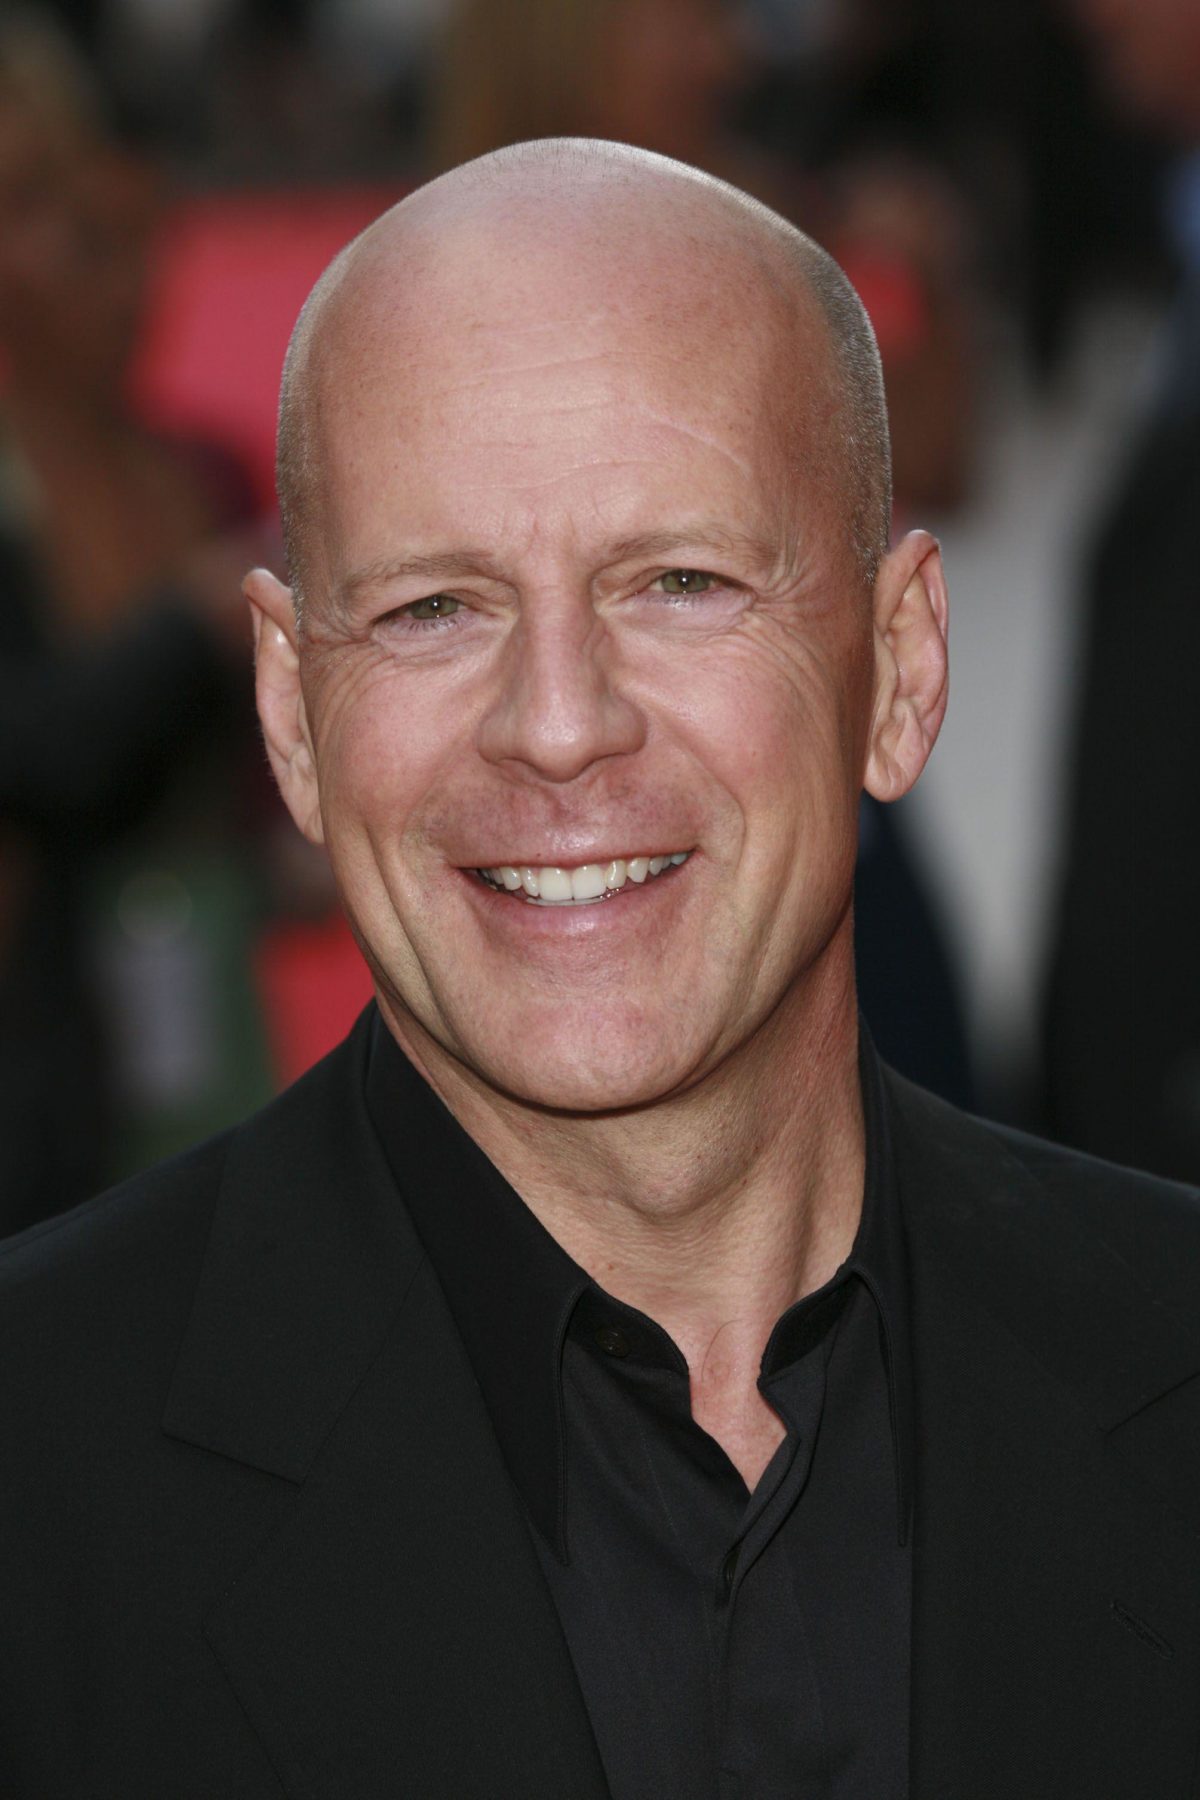 HD Bruce Willis Wallpapers and Photos | HD Celebrities Wallpapers